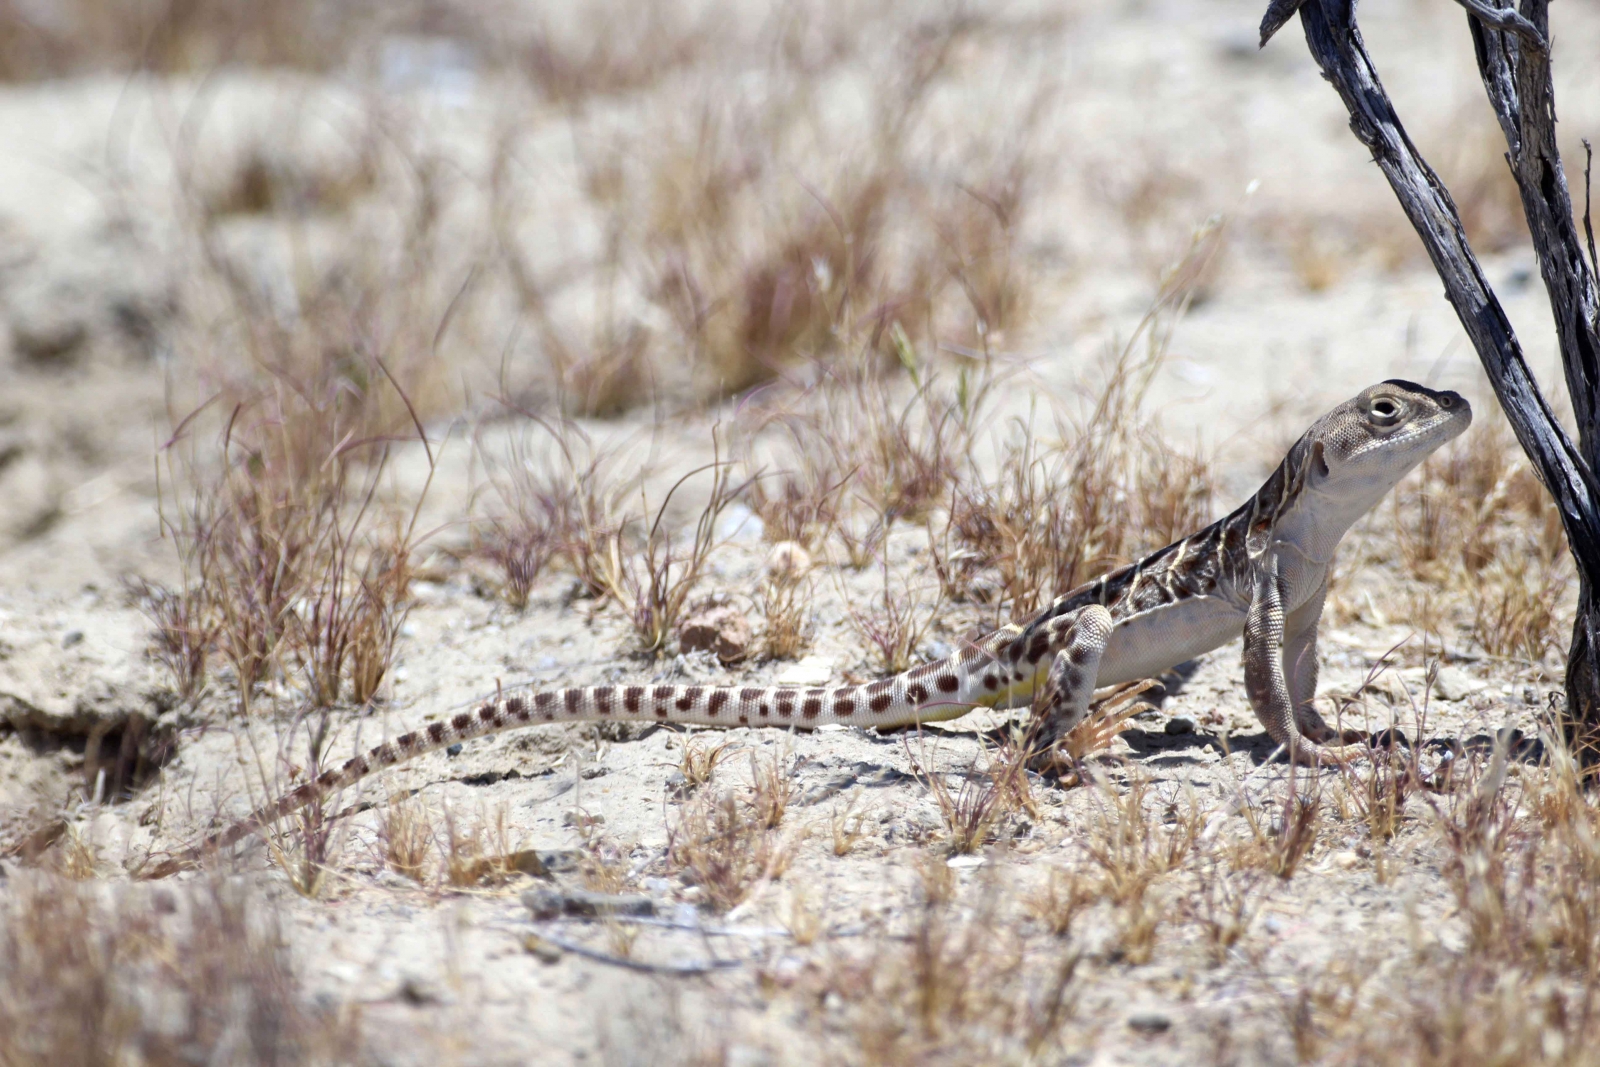 California’s Blunt-nosed Leopard Lizard Threatened By Warming Planet, Study Says